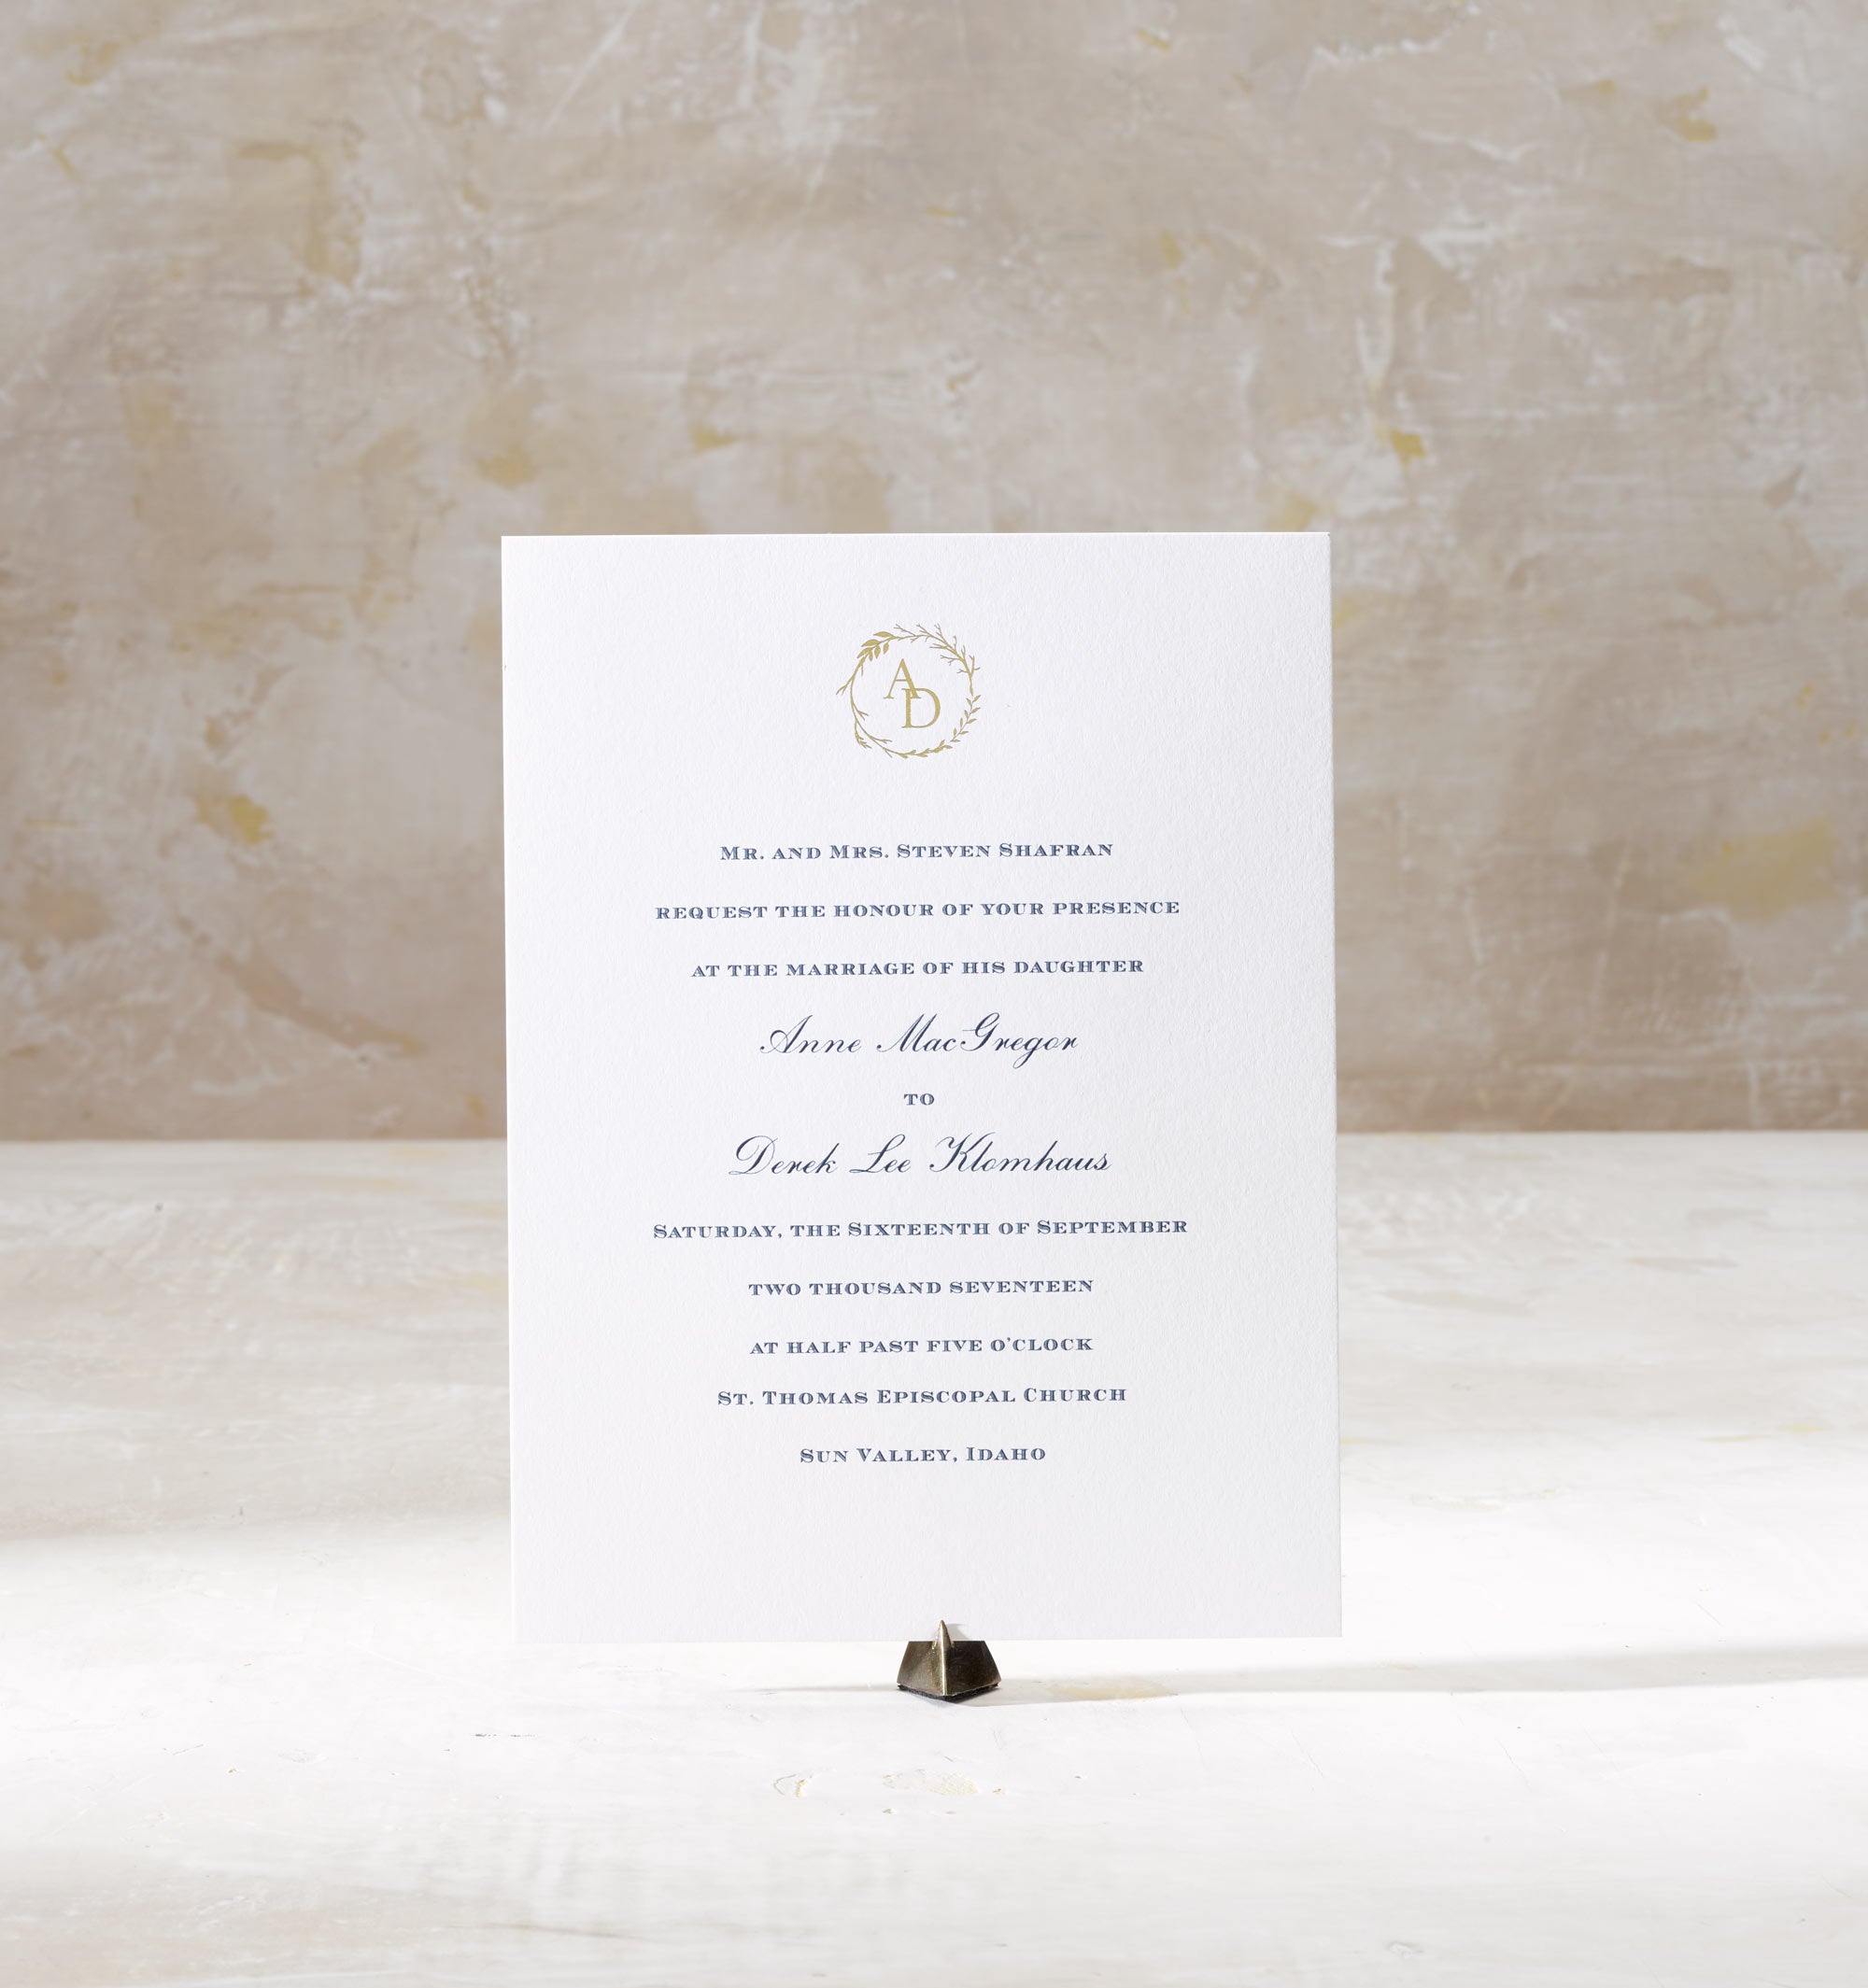 Anne & Derek is an engraved & foil stamped suite in navy and gold, set in Sun Valley Indiana. Call us toll-free at 1-800-995-1549 or email us at hello@pickettspress.com